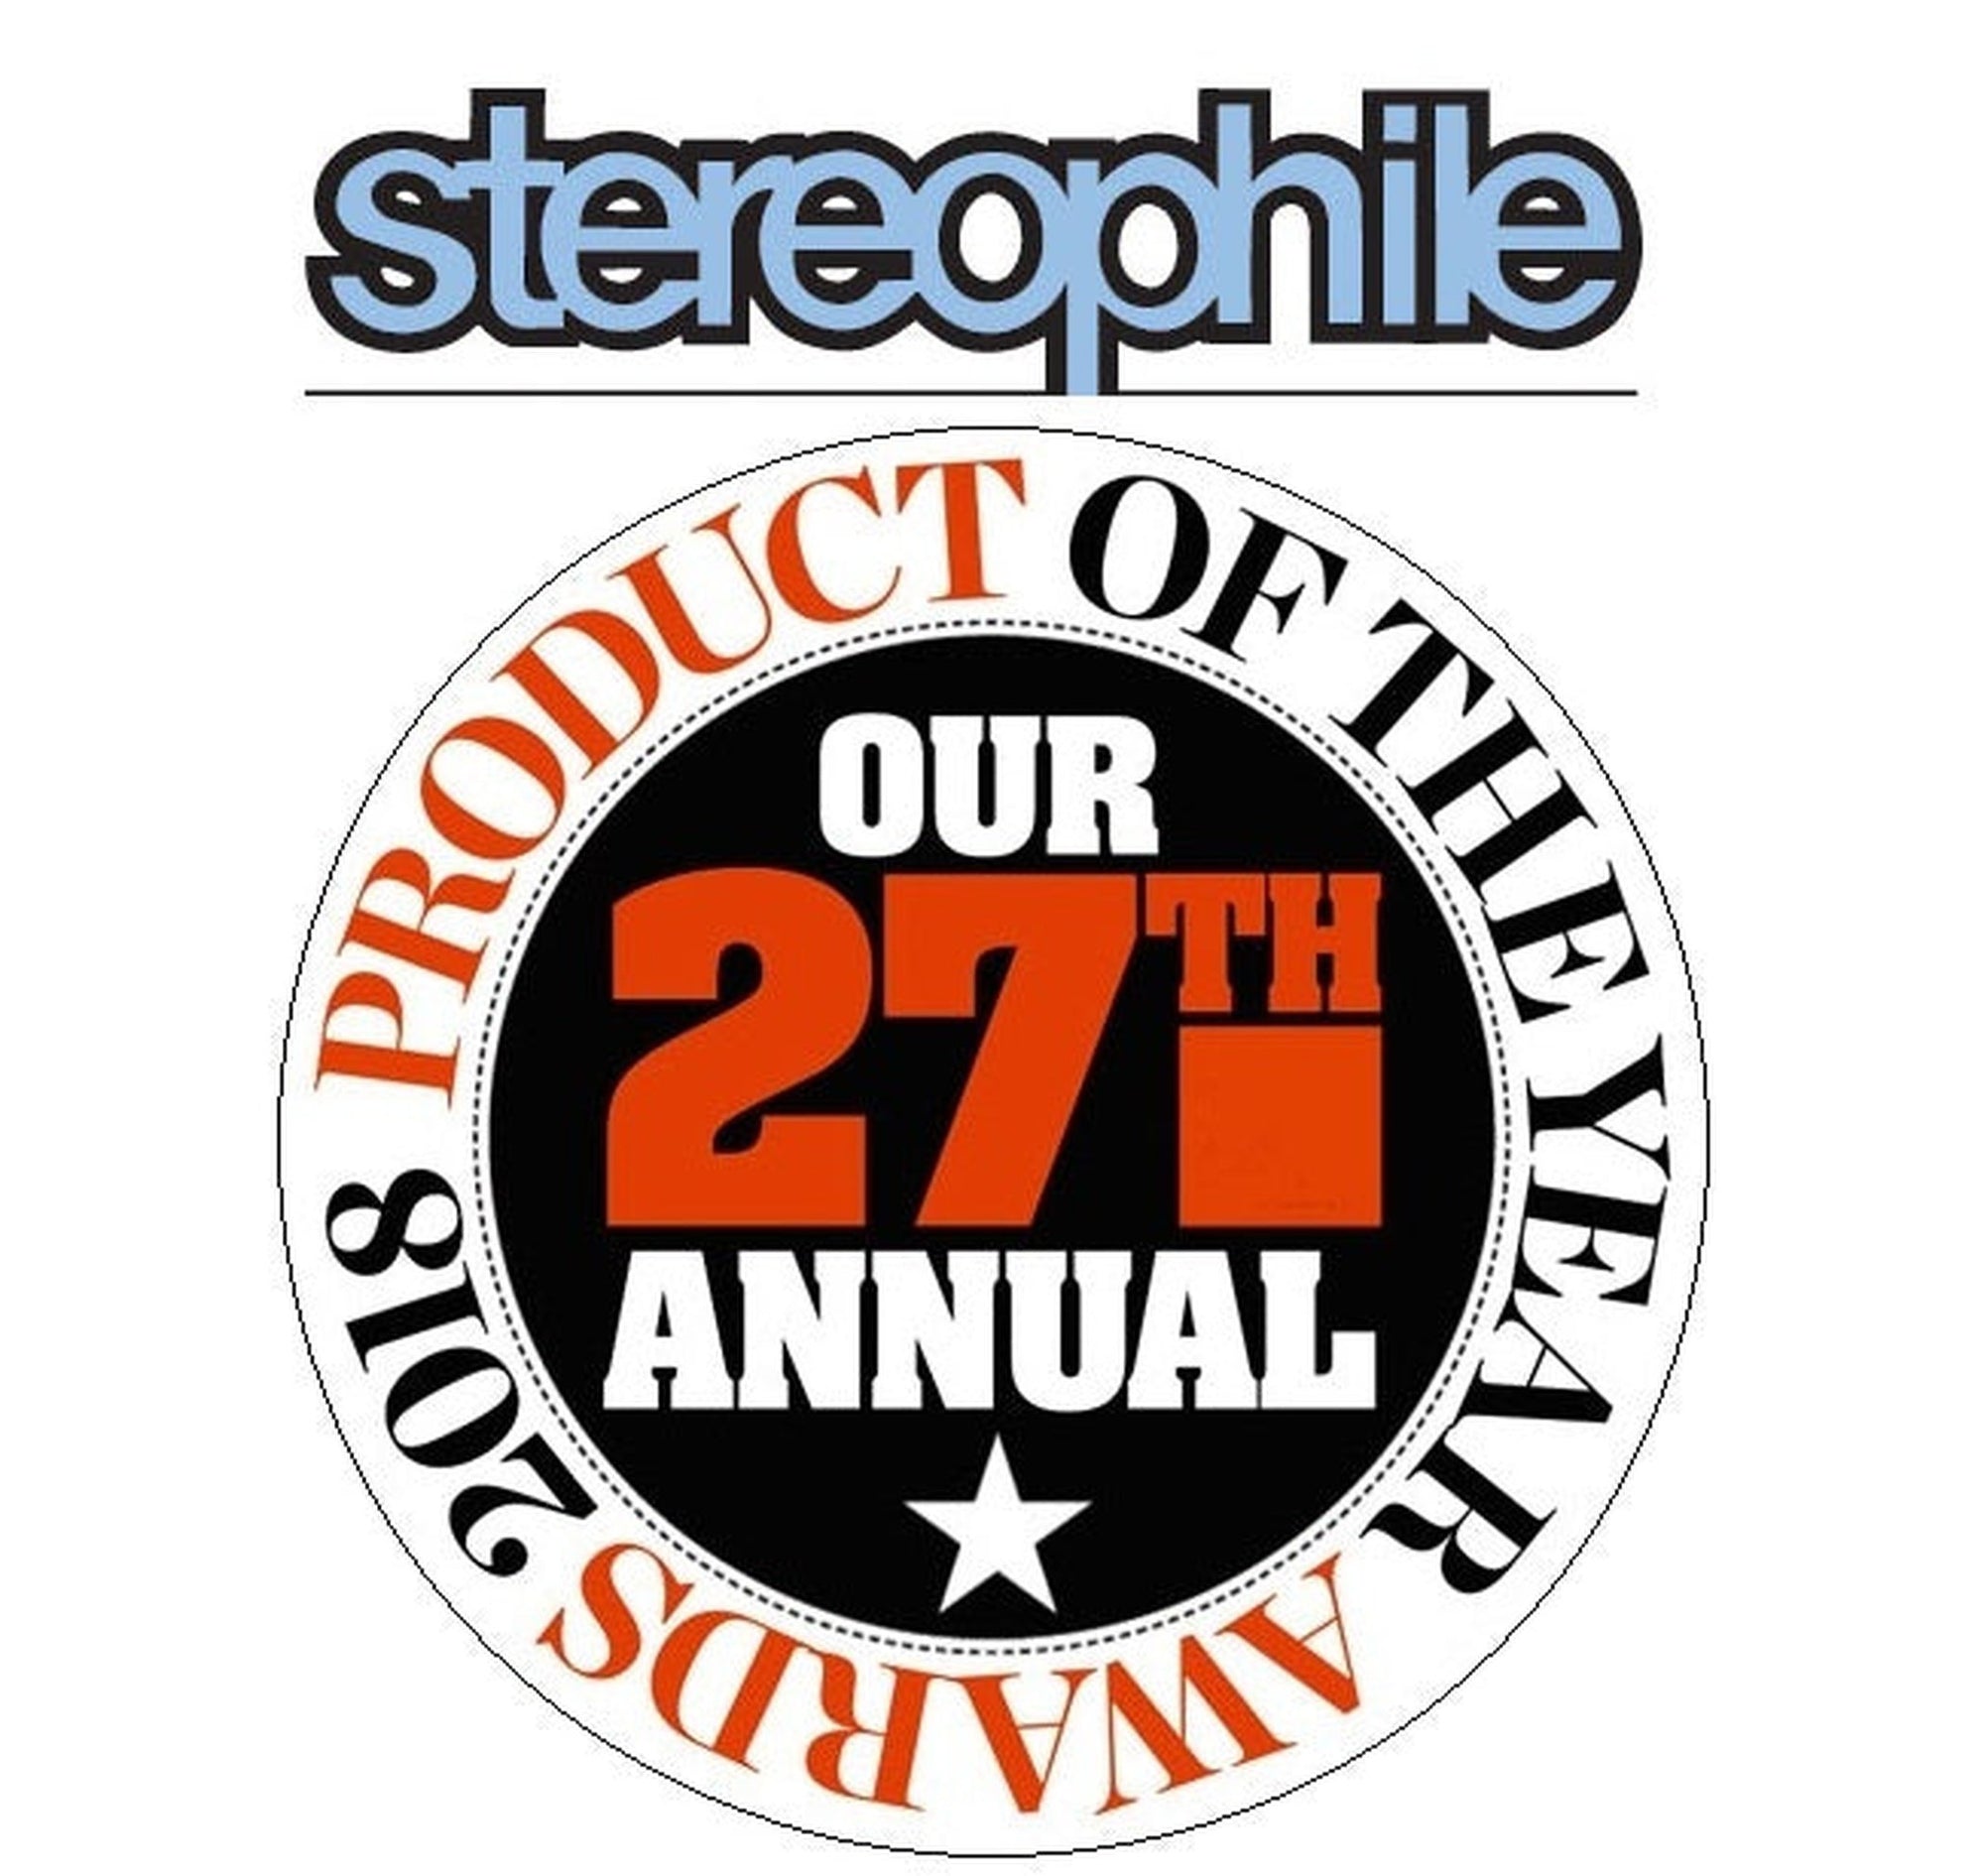 Stereophile 2018 Product of the Year Award